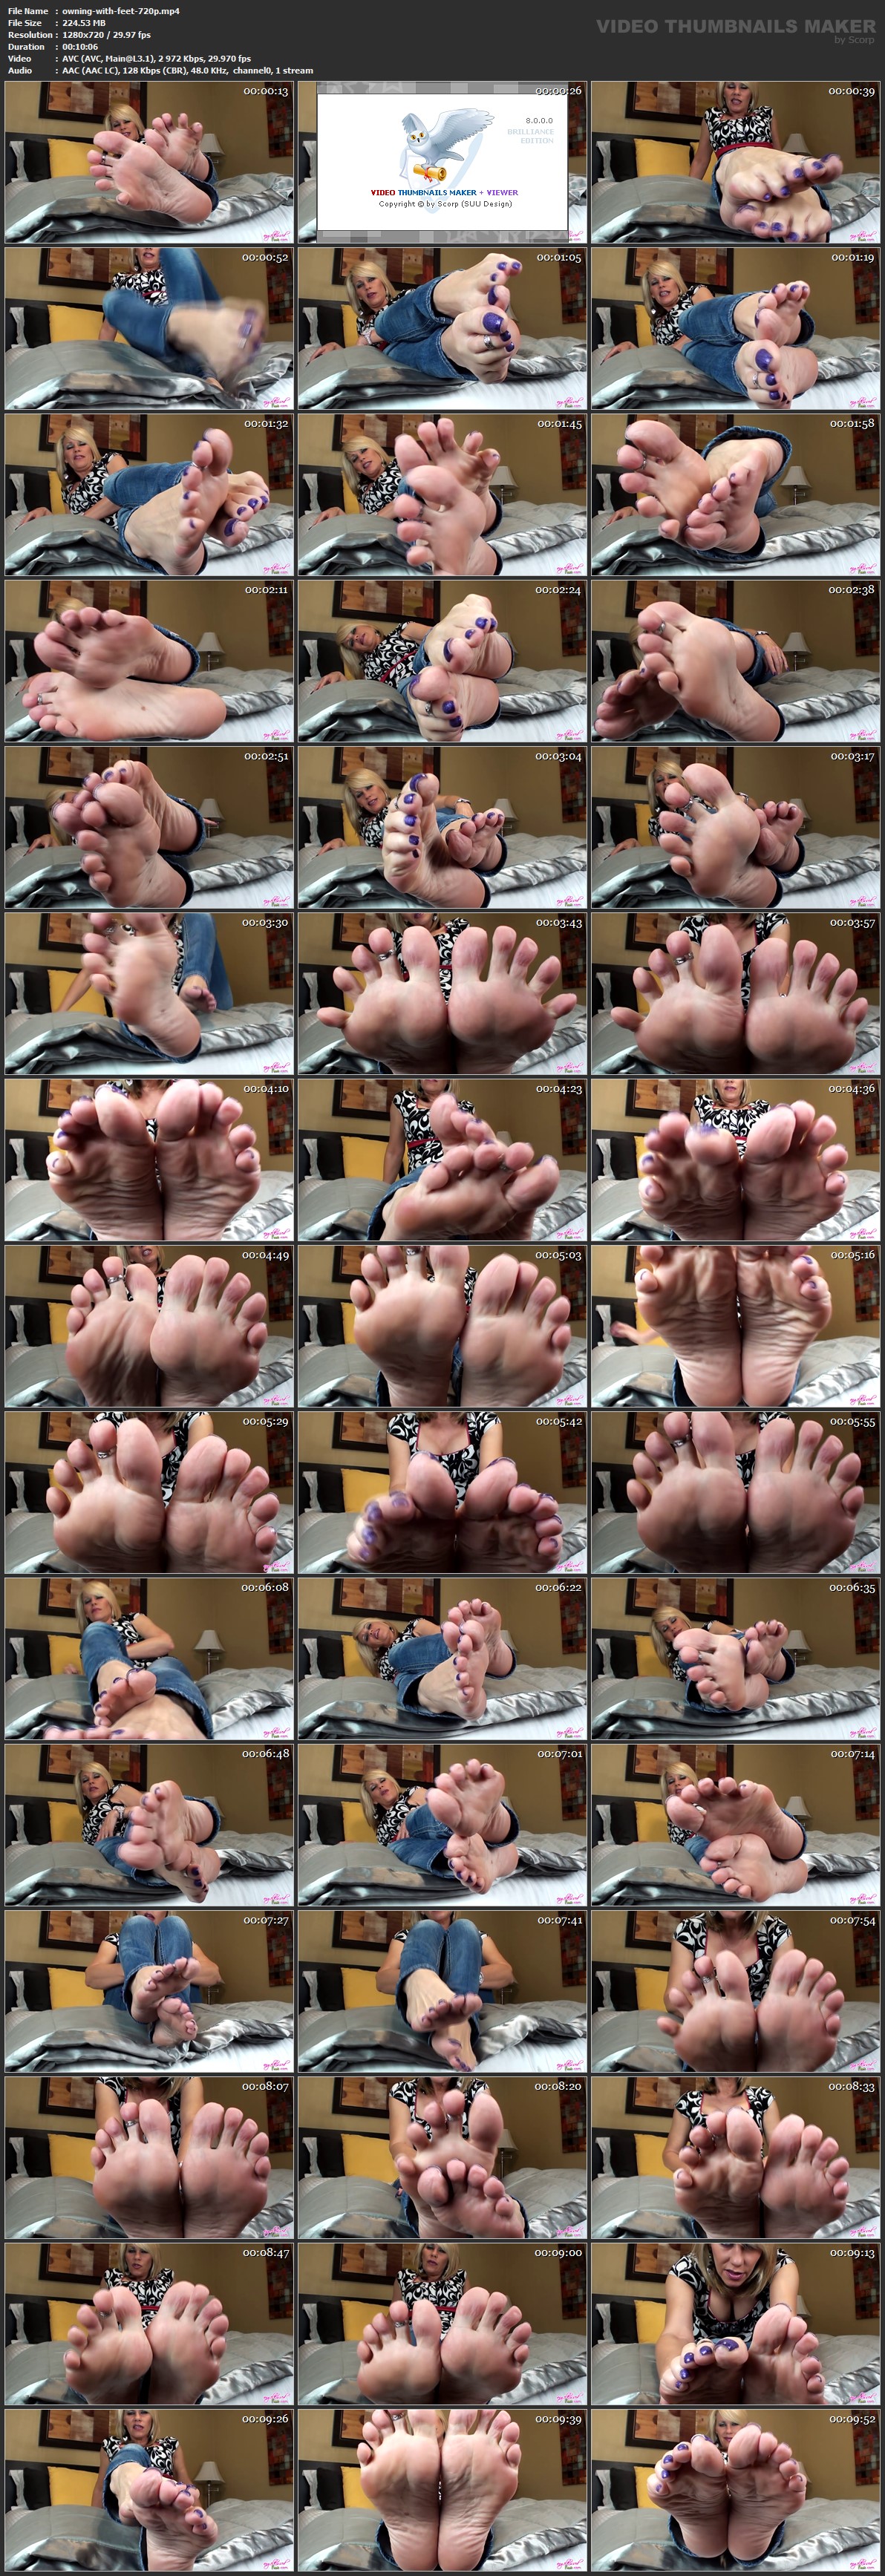 owning with feet 720 p mp 4